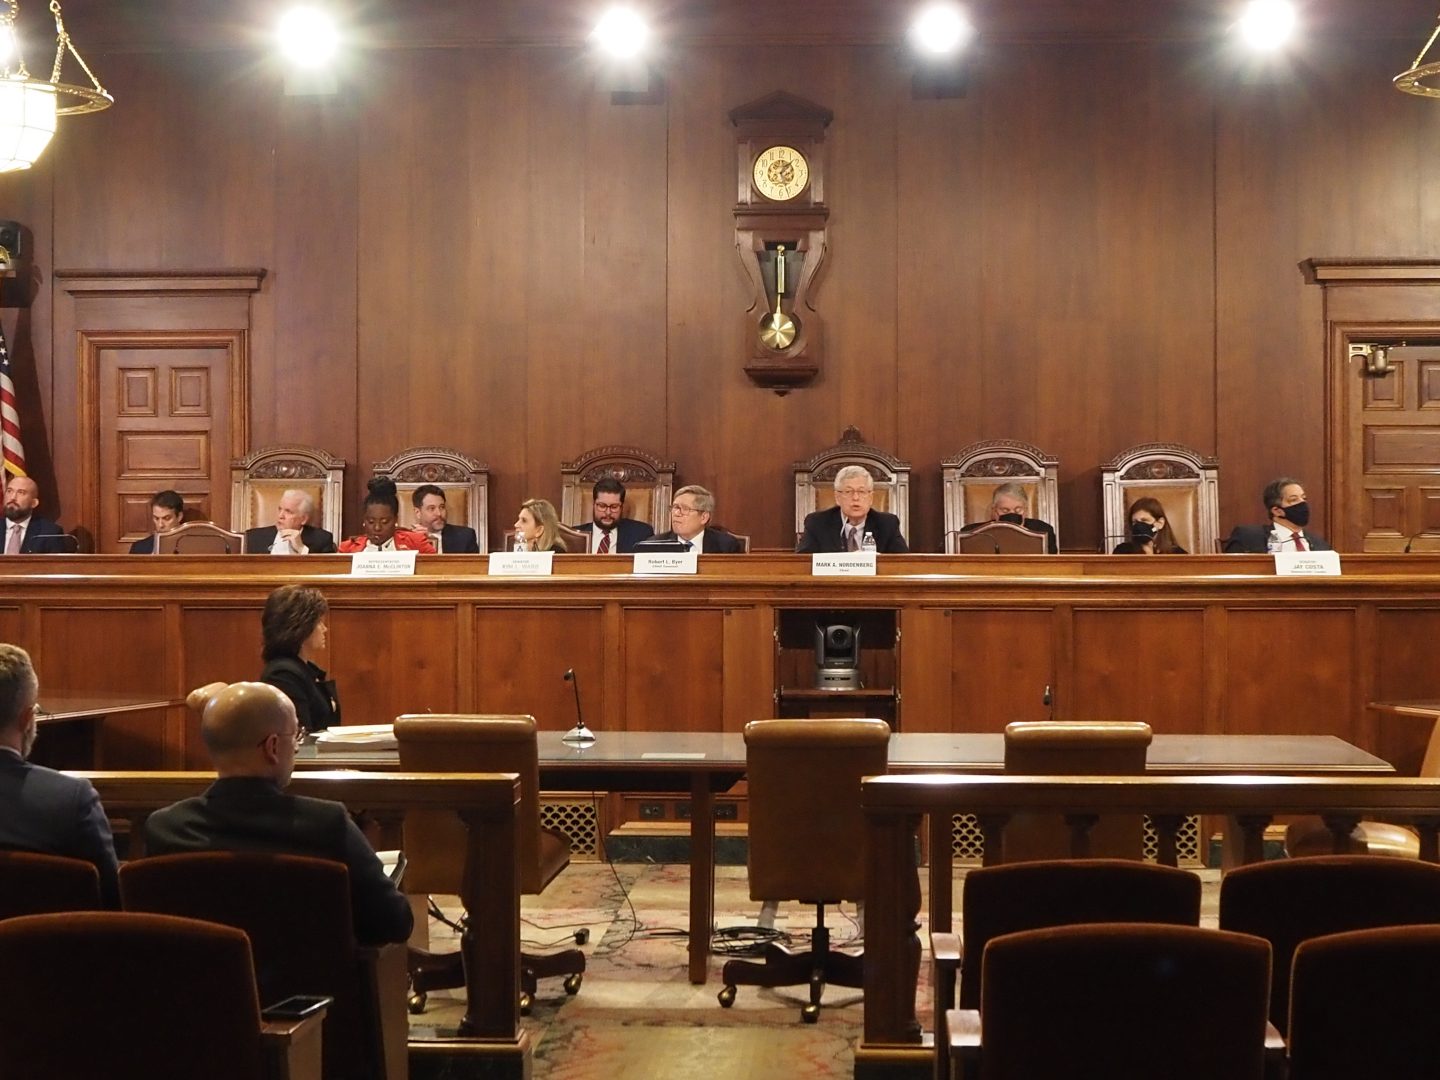 A meeting of the Legislative Reapportionment Commission on Feb. 4, 2022 at the state Capitol building in Harrisburg.